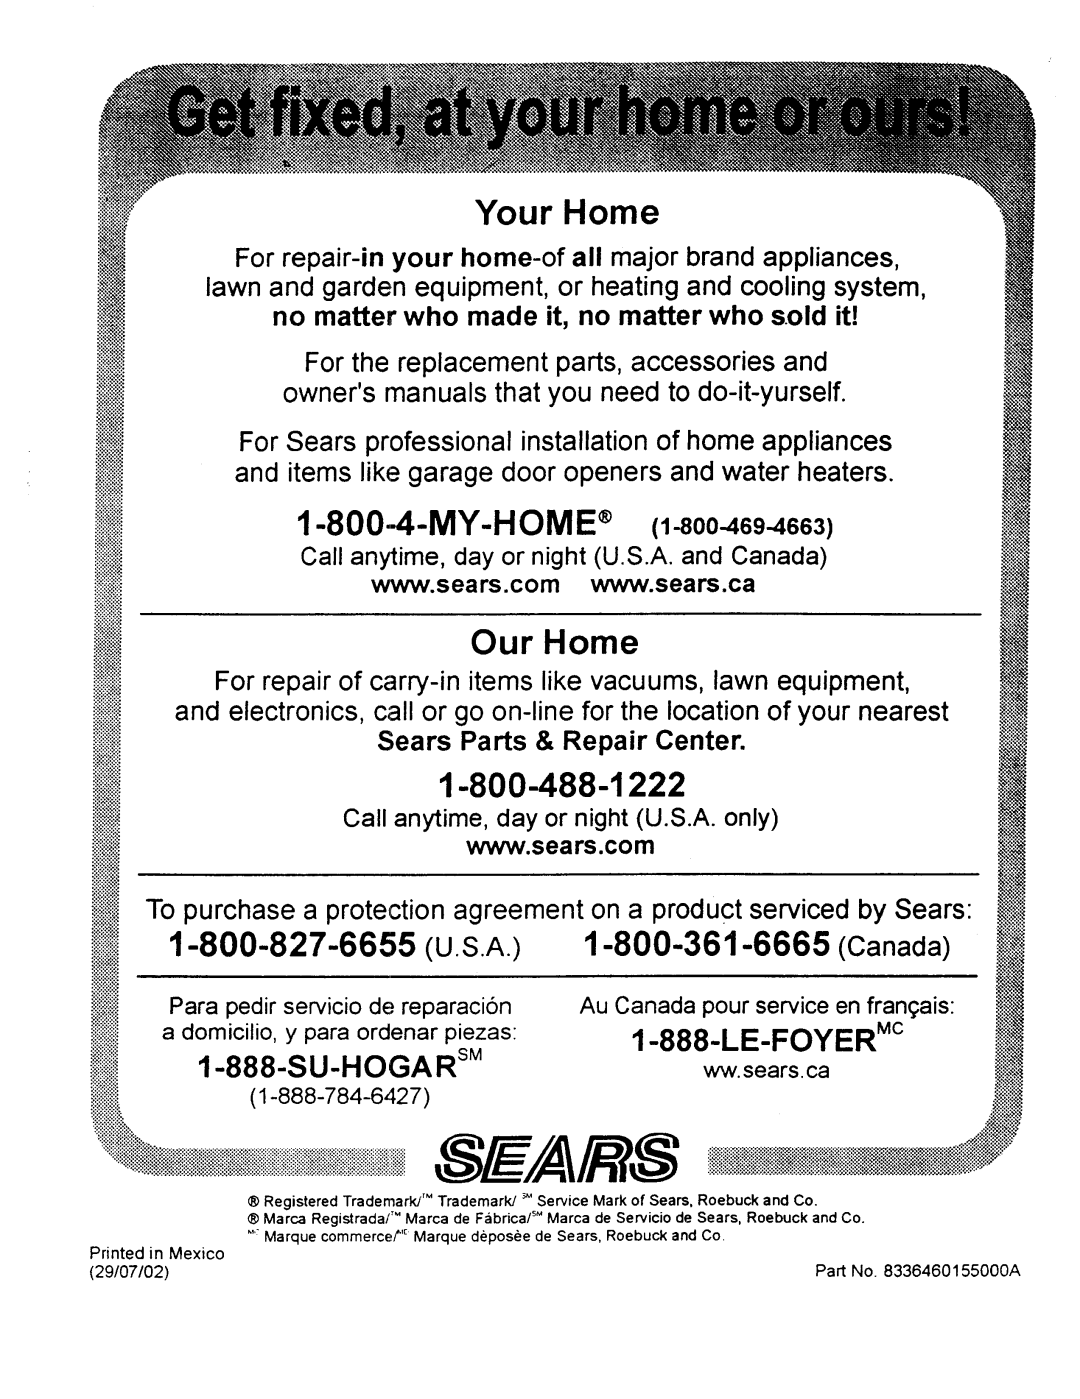 Kenmore 91499 Your Home, My-Home, Our Home, Sears Parts & Repair Center, Call anytime, day or night U.S.A. and Canada 